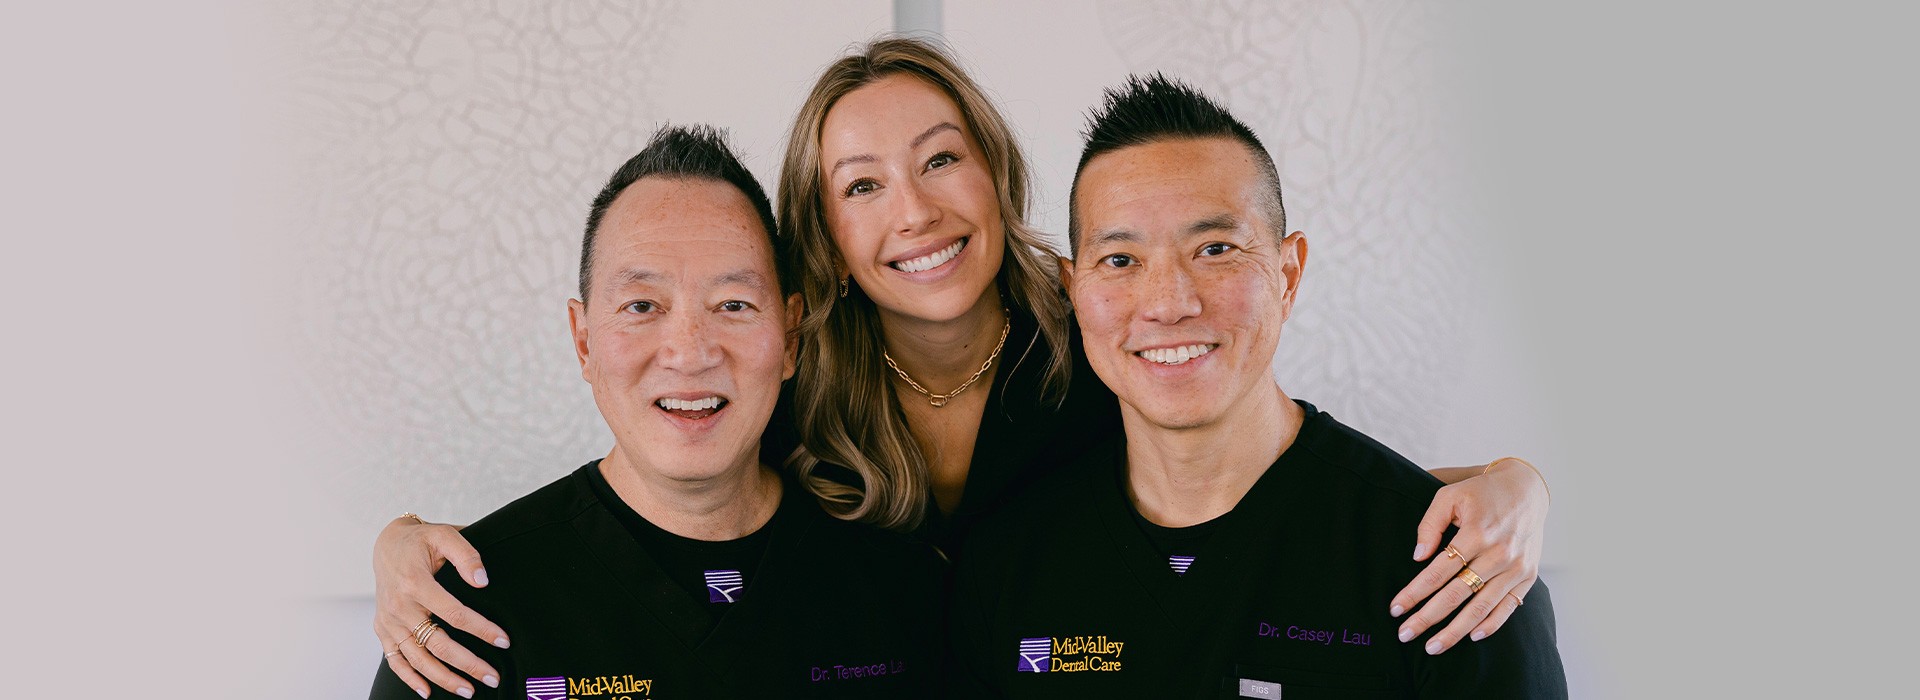 Mid-Valley Dental Care Doctors